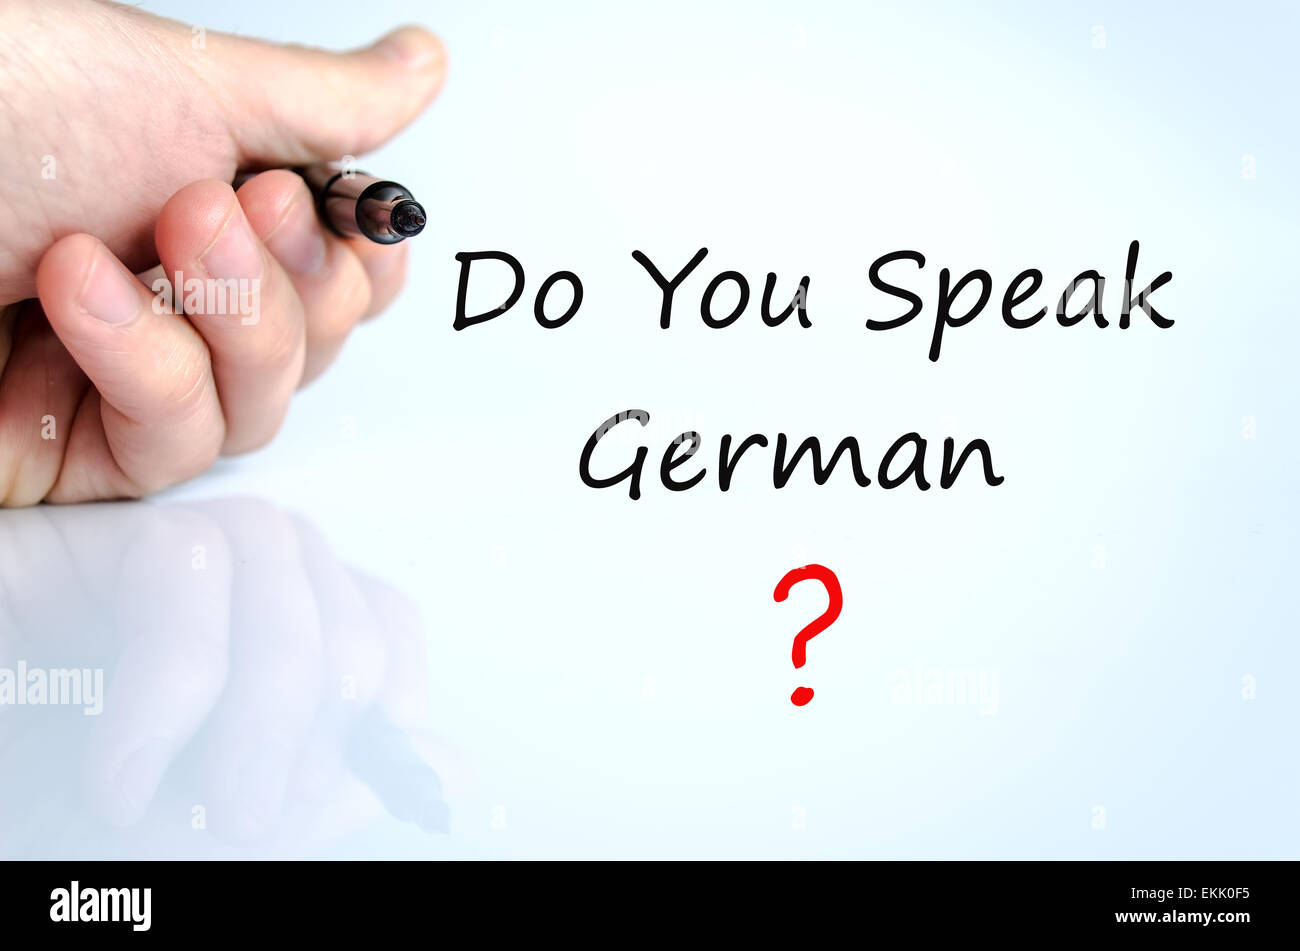 Do You Speak German Concept Isolated Over White Background Stock Photo